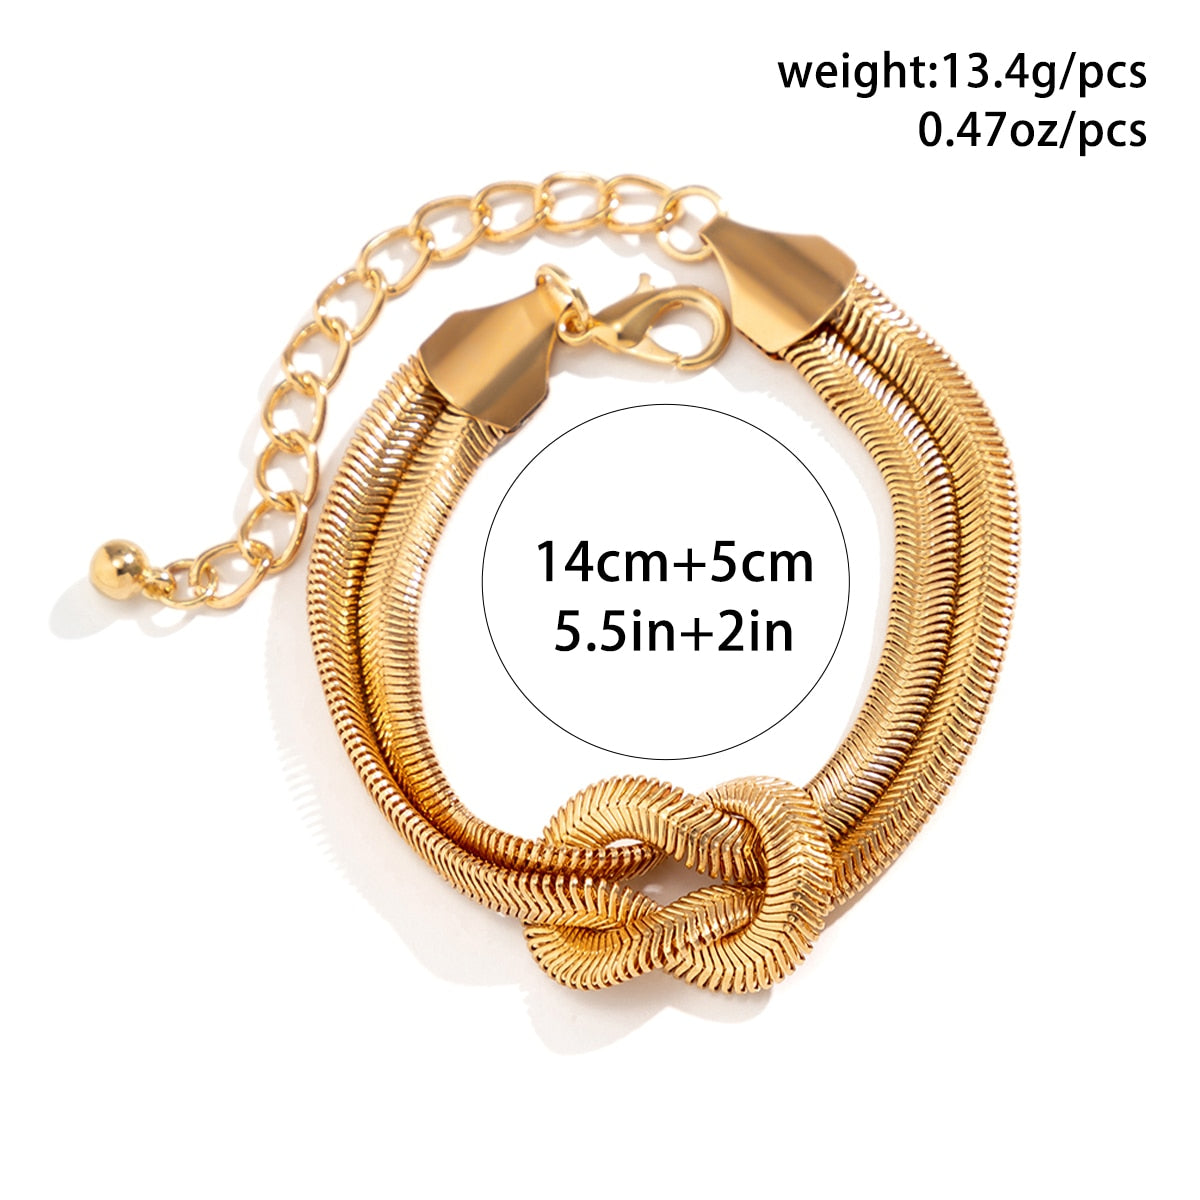 Maytrends Fashion Flat Snake Chain Thick Metal Chain Bracelet Vintage Design Double Rope Buckle Bracelet Trend For Women Jewelry